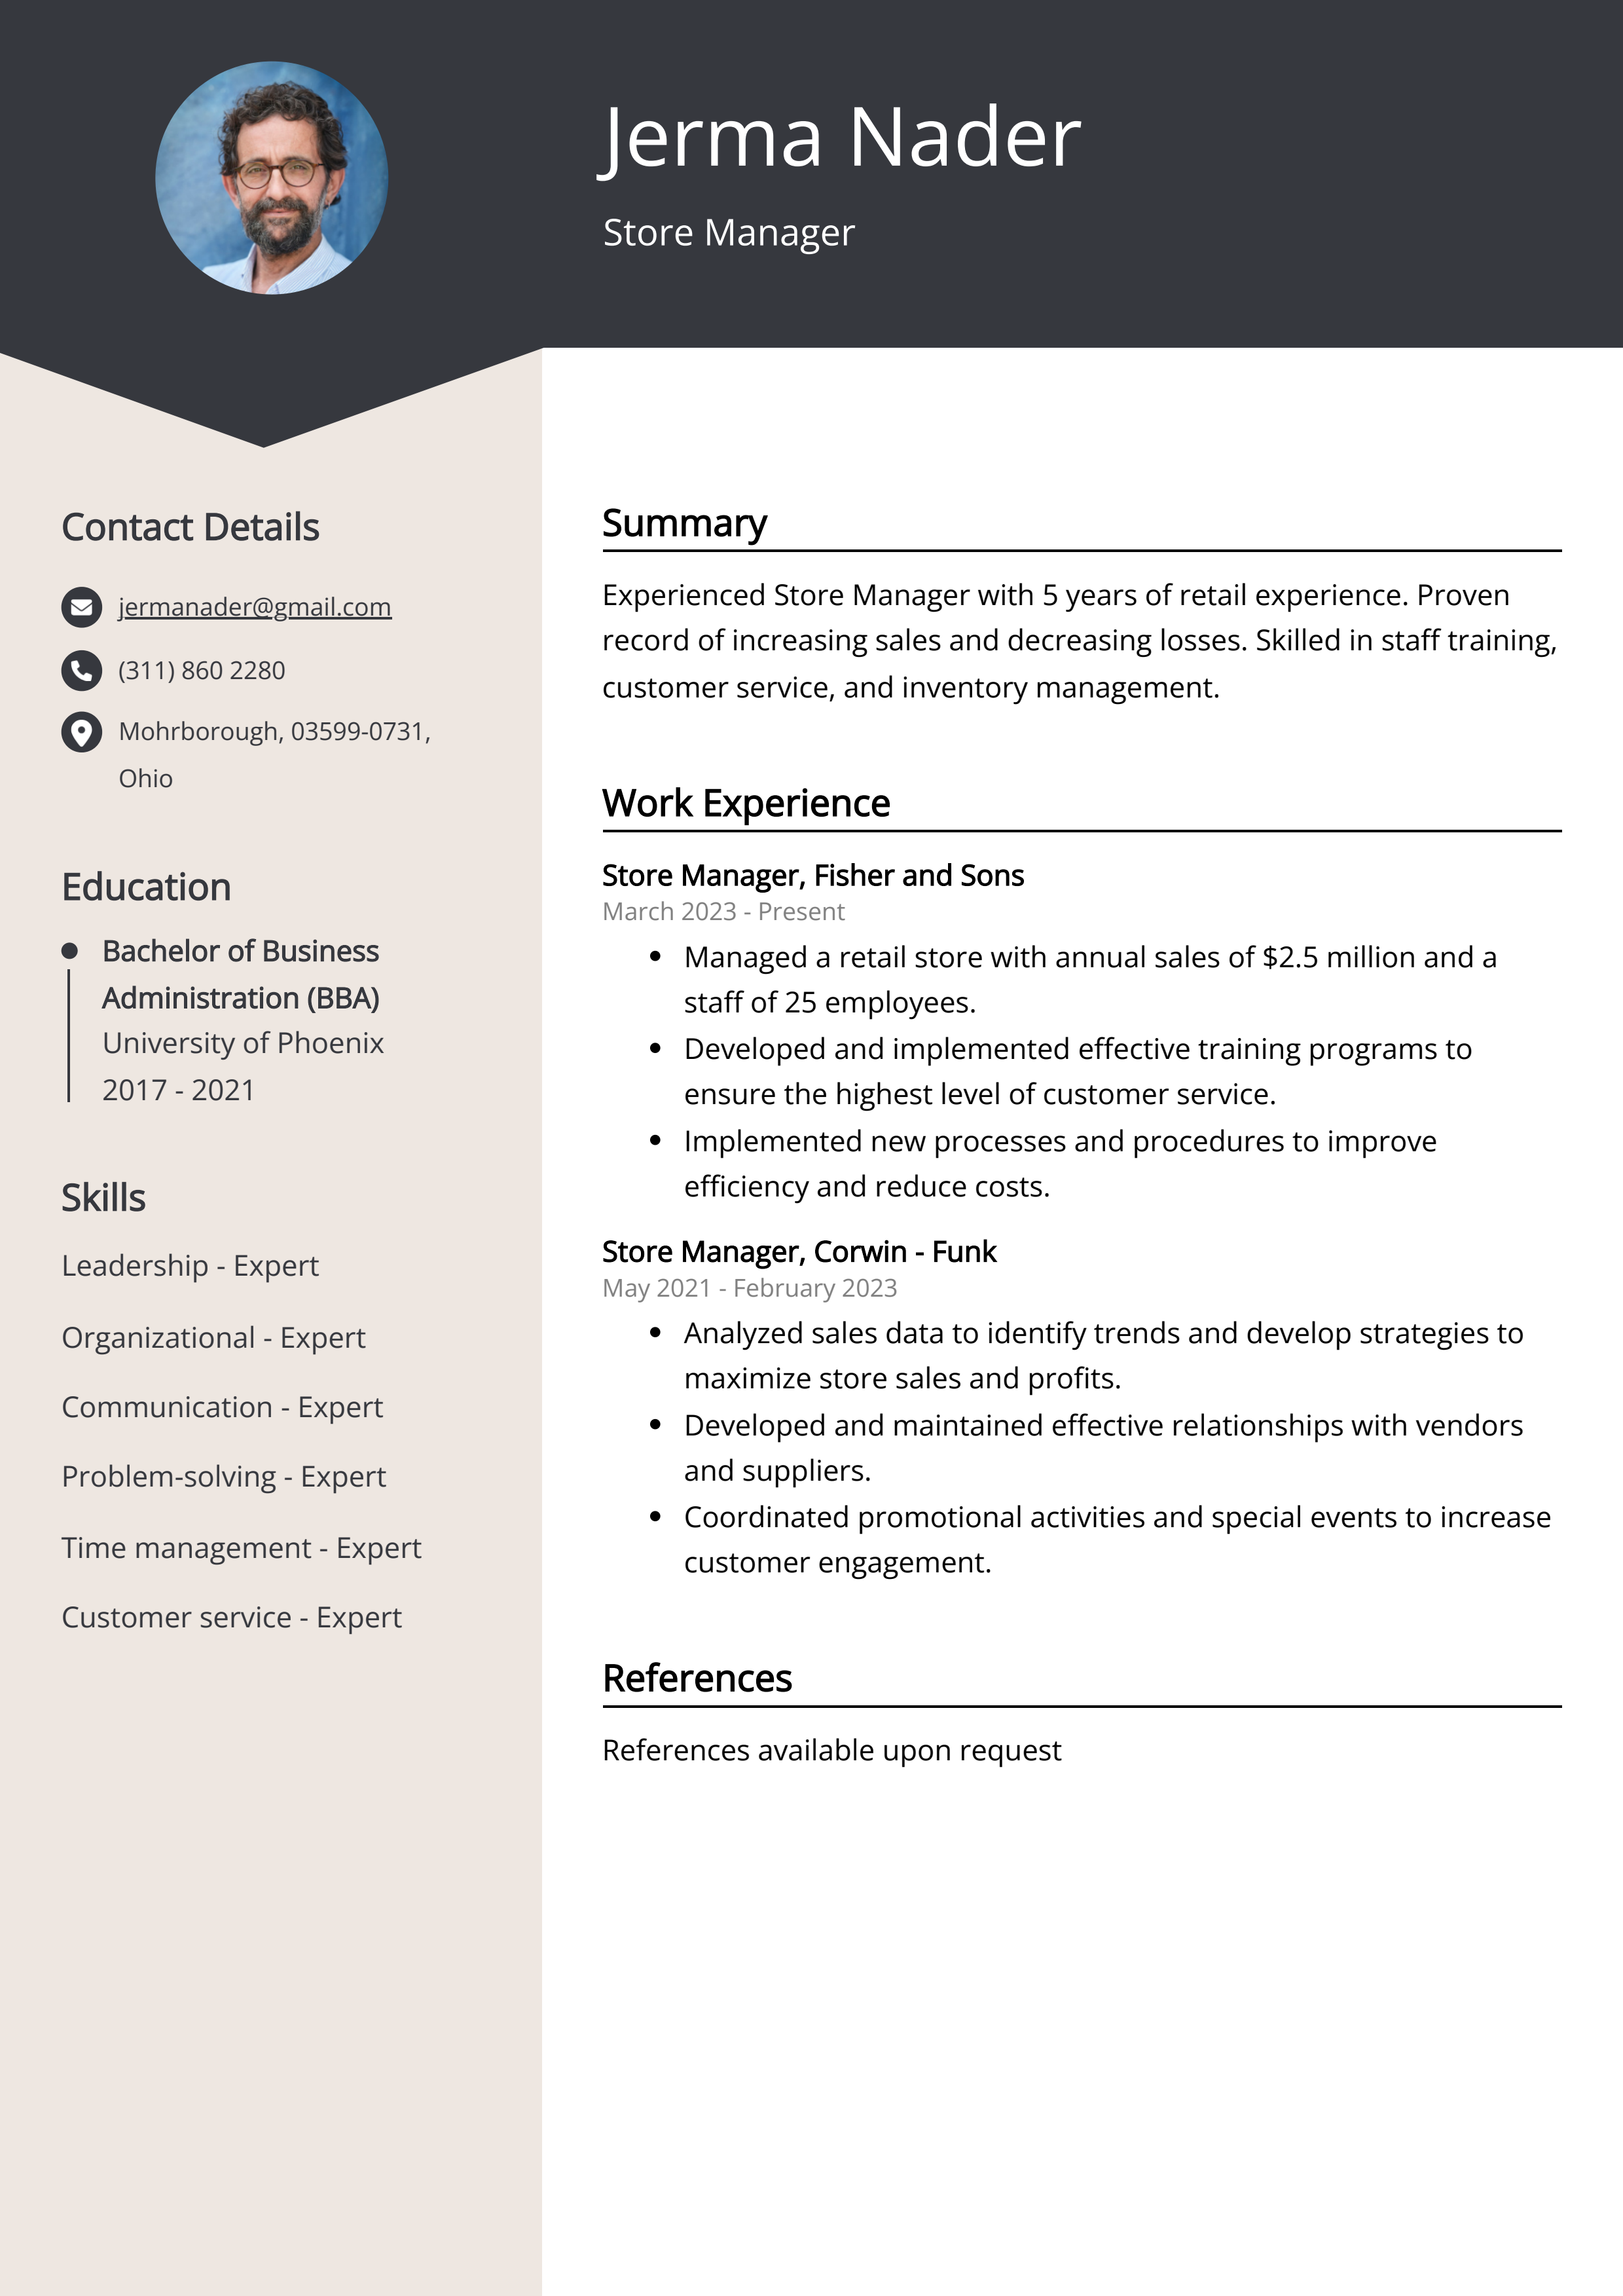 Store Manager CV Example